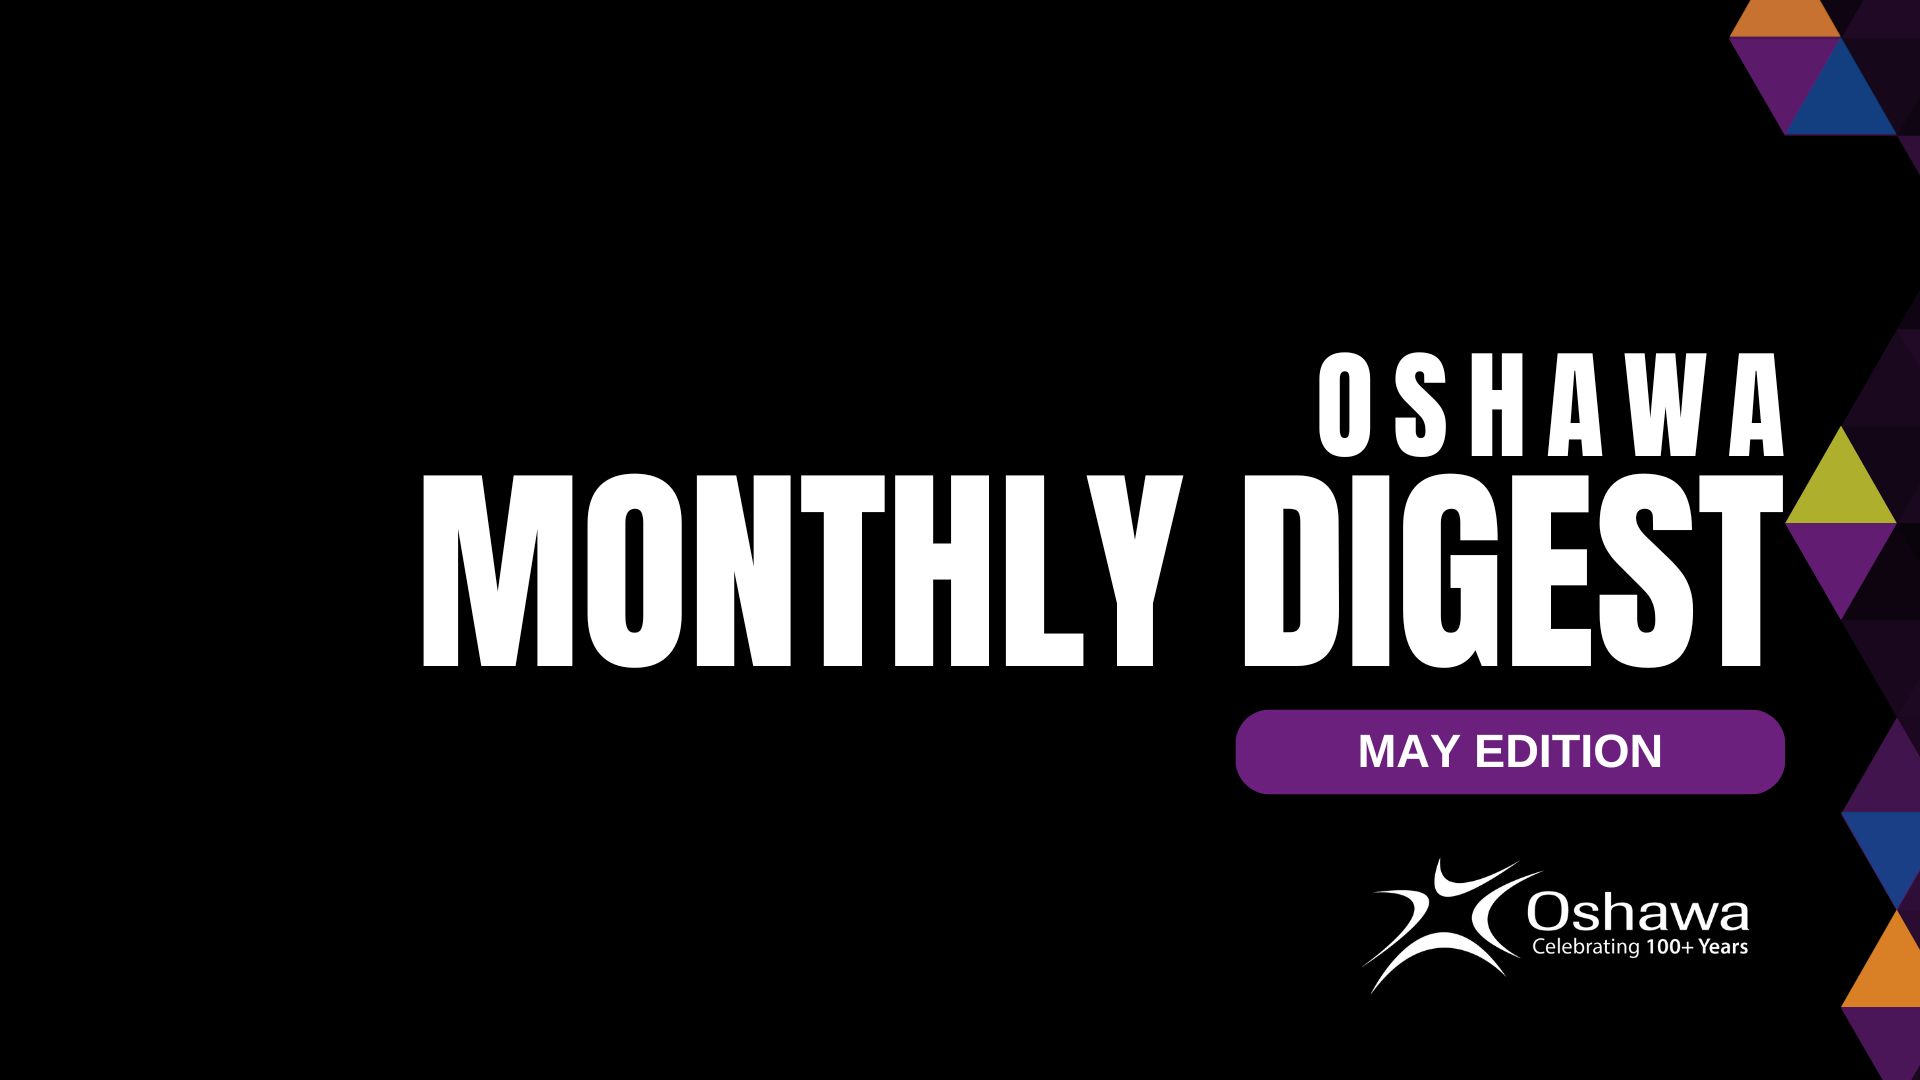 Our Oshawa Monthly Digest May Edition